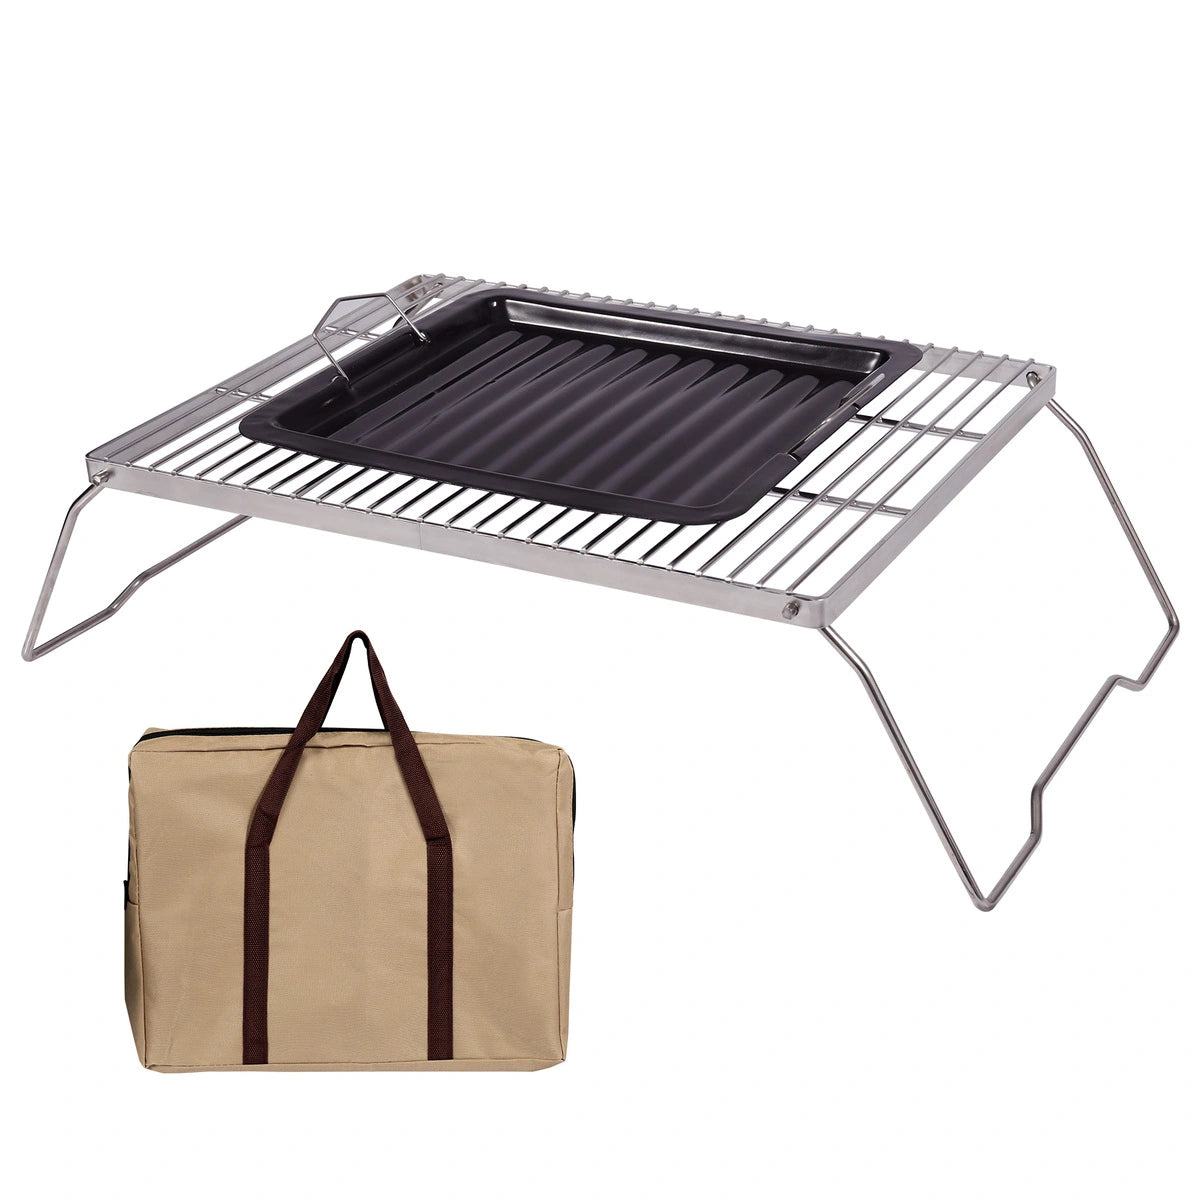 Heavy Duty Portable Camping Grill with Legs